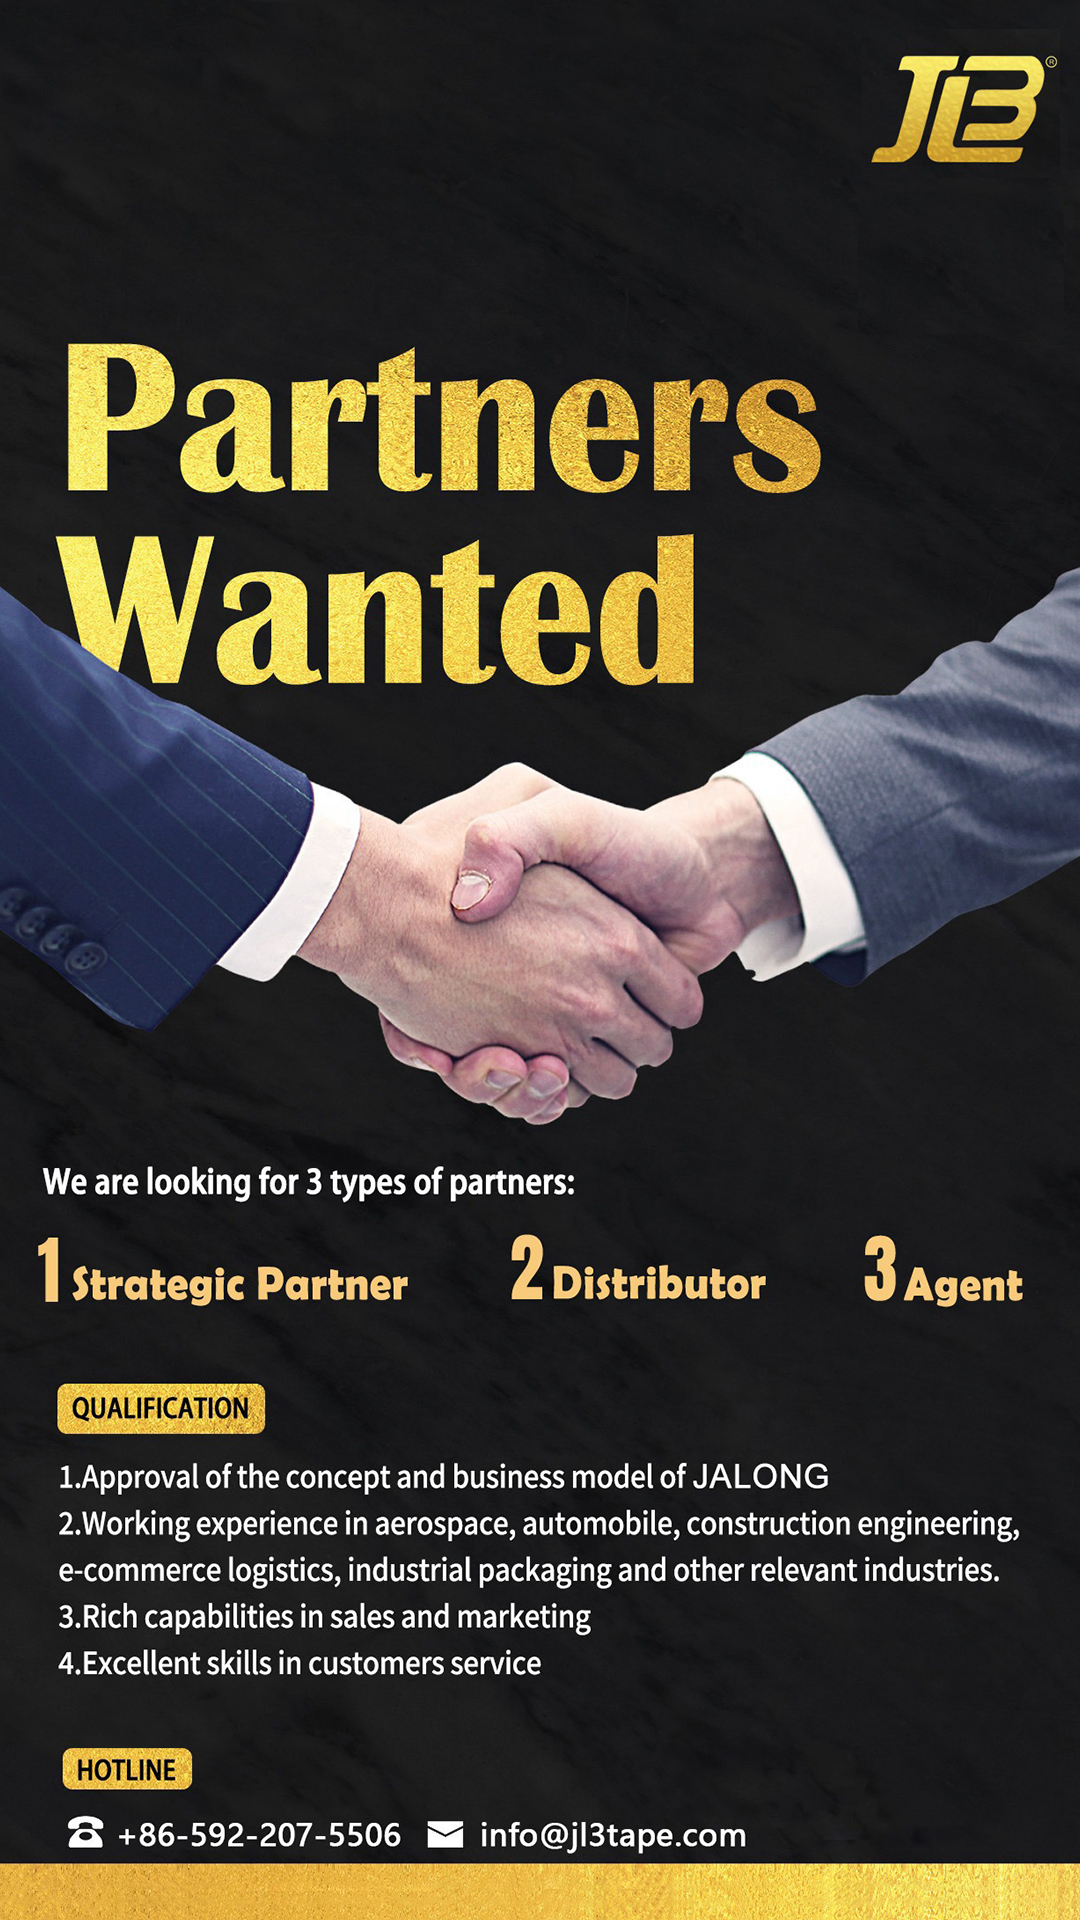 Partners wanted